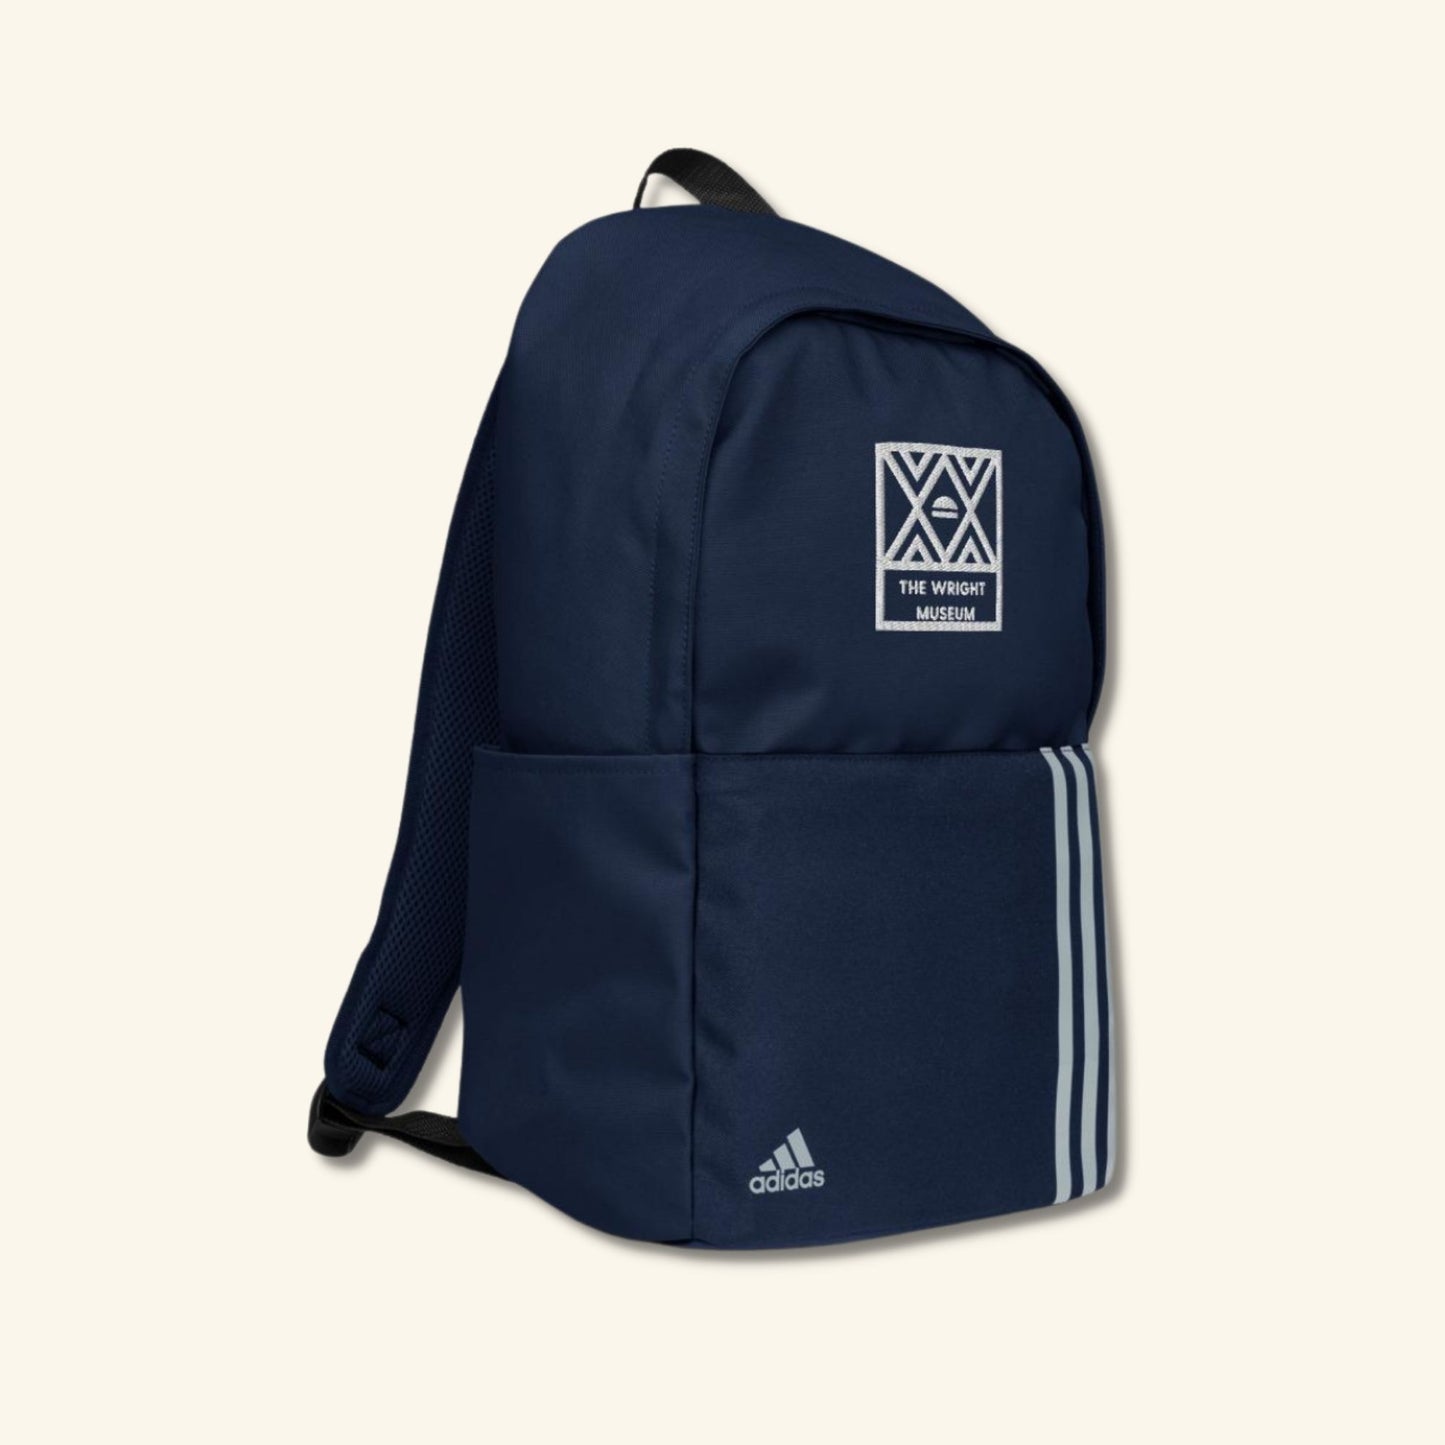 Wright Museum Embroidered Adidas Backpack